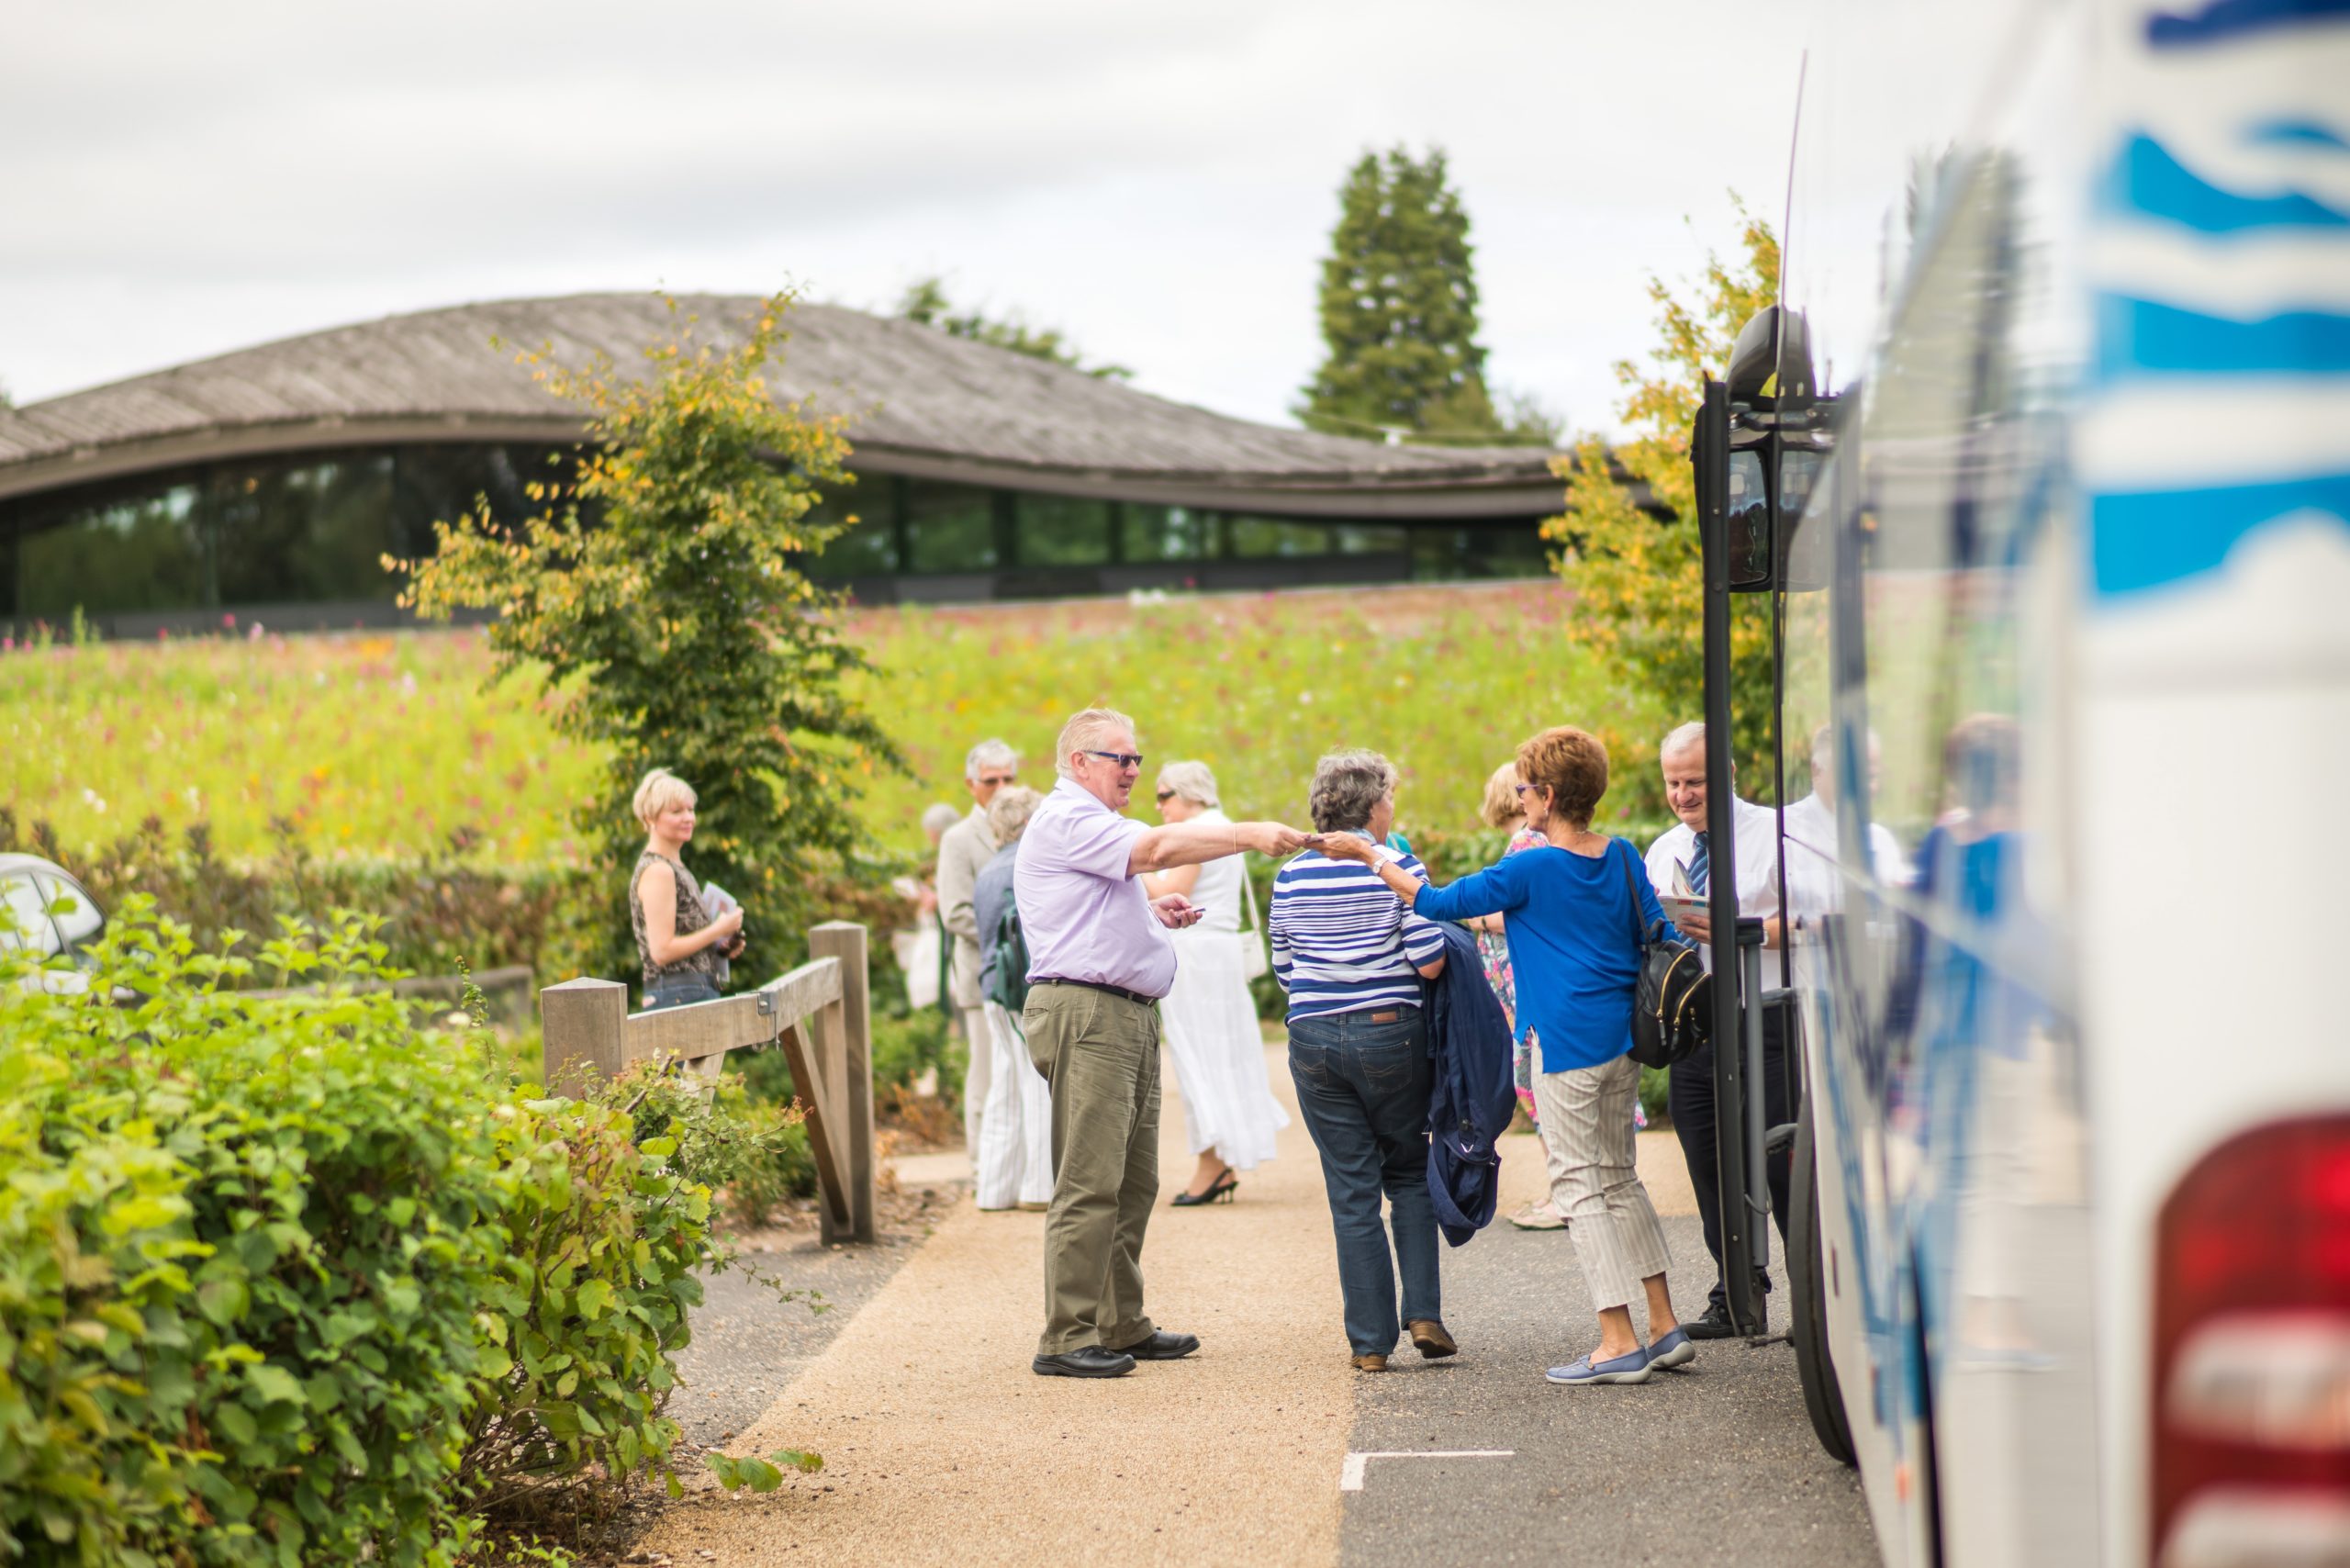 A group of people disembarking a coach at The Savill Garden Visitor Centre car park.